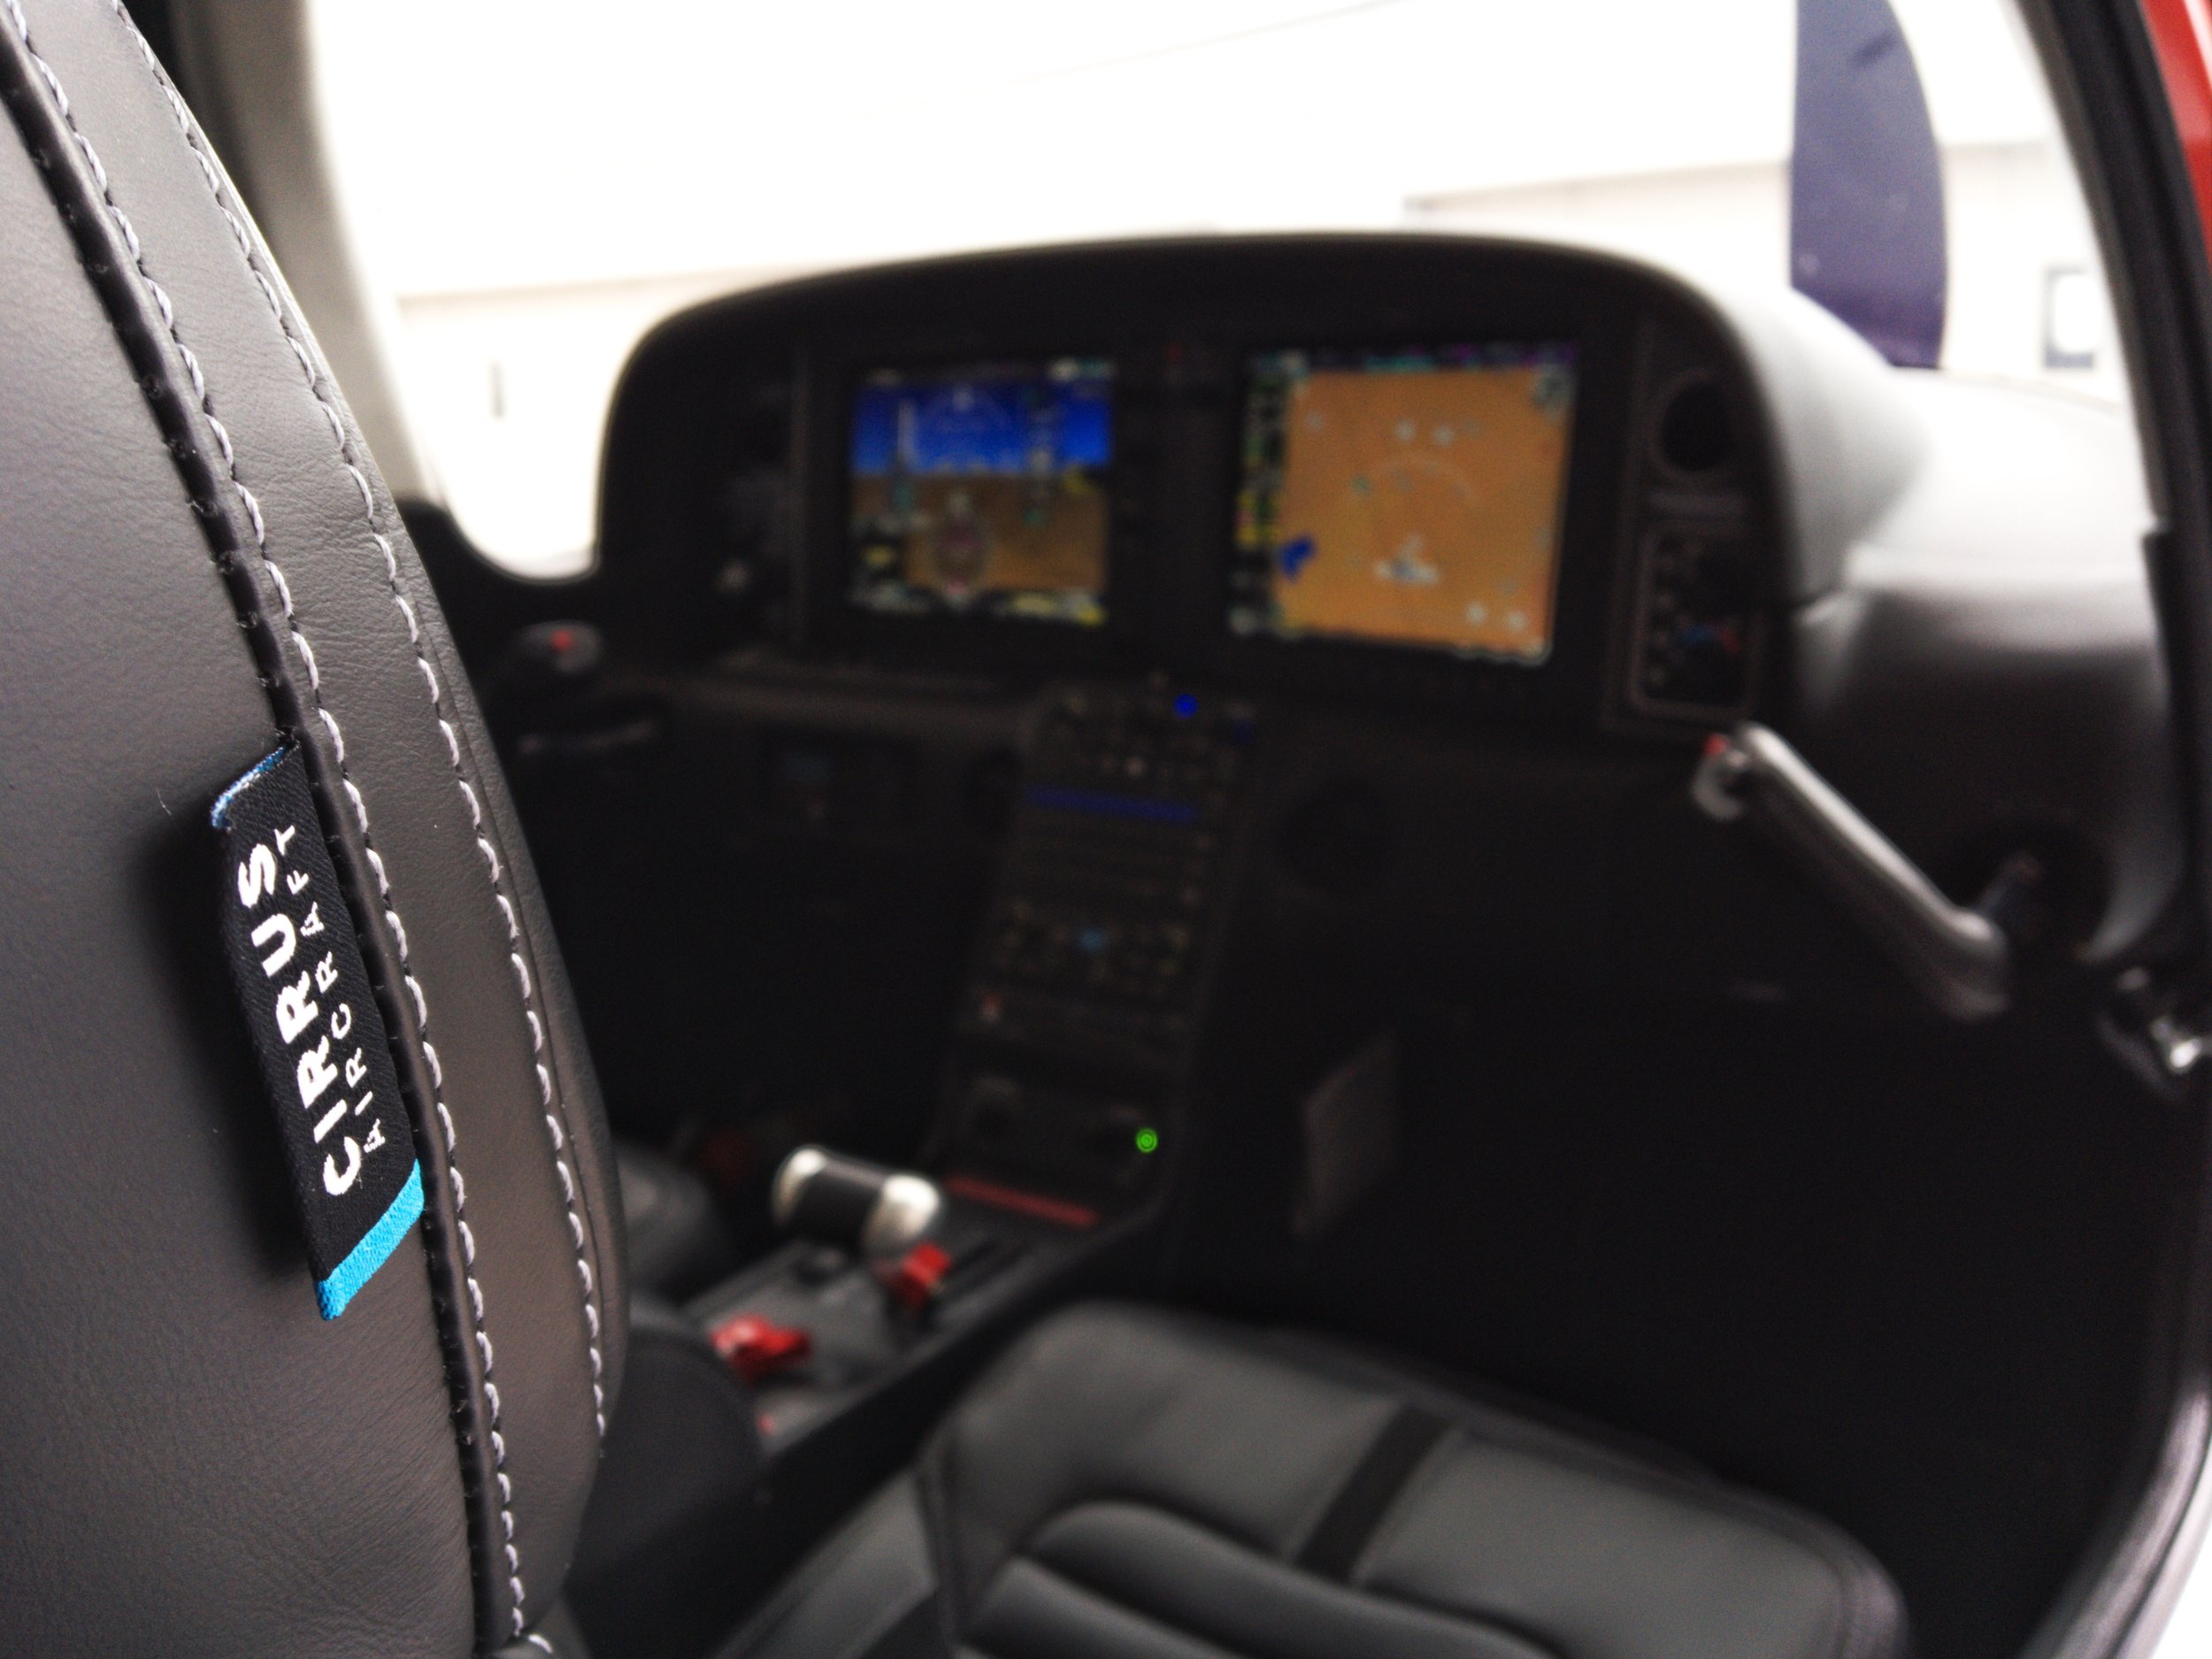 Featuring Garmin Avionics including the G1000 Perspective+